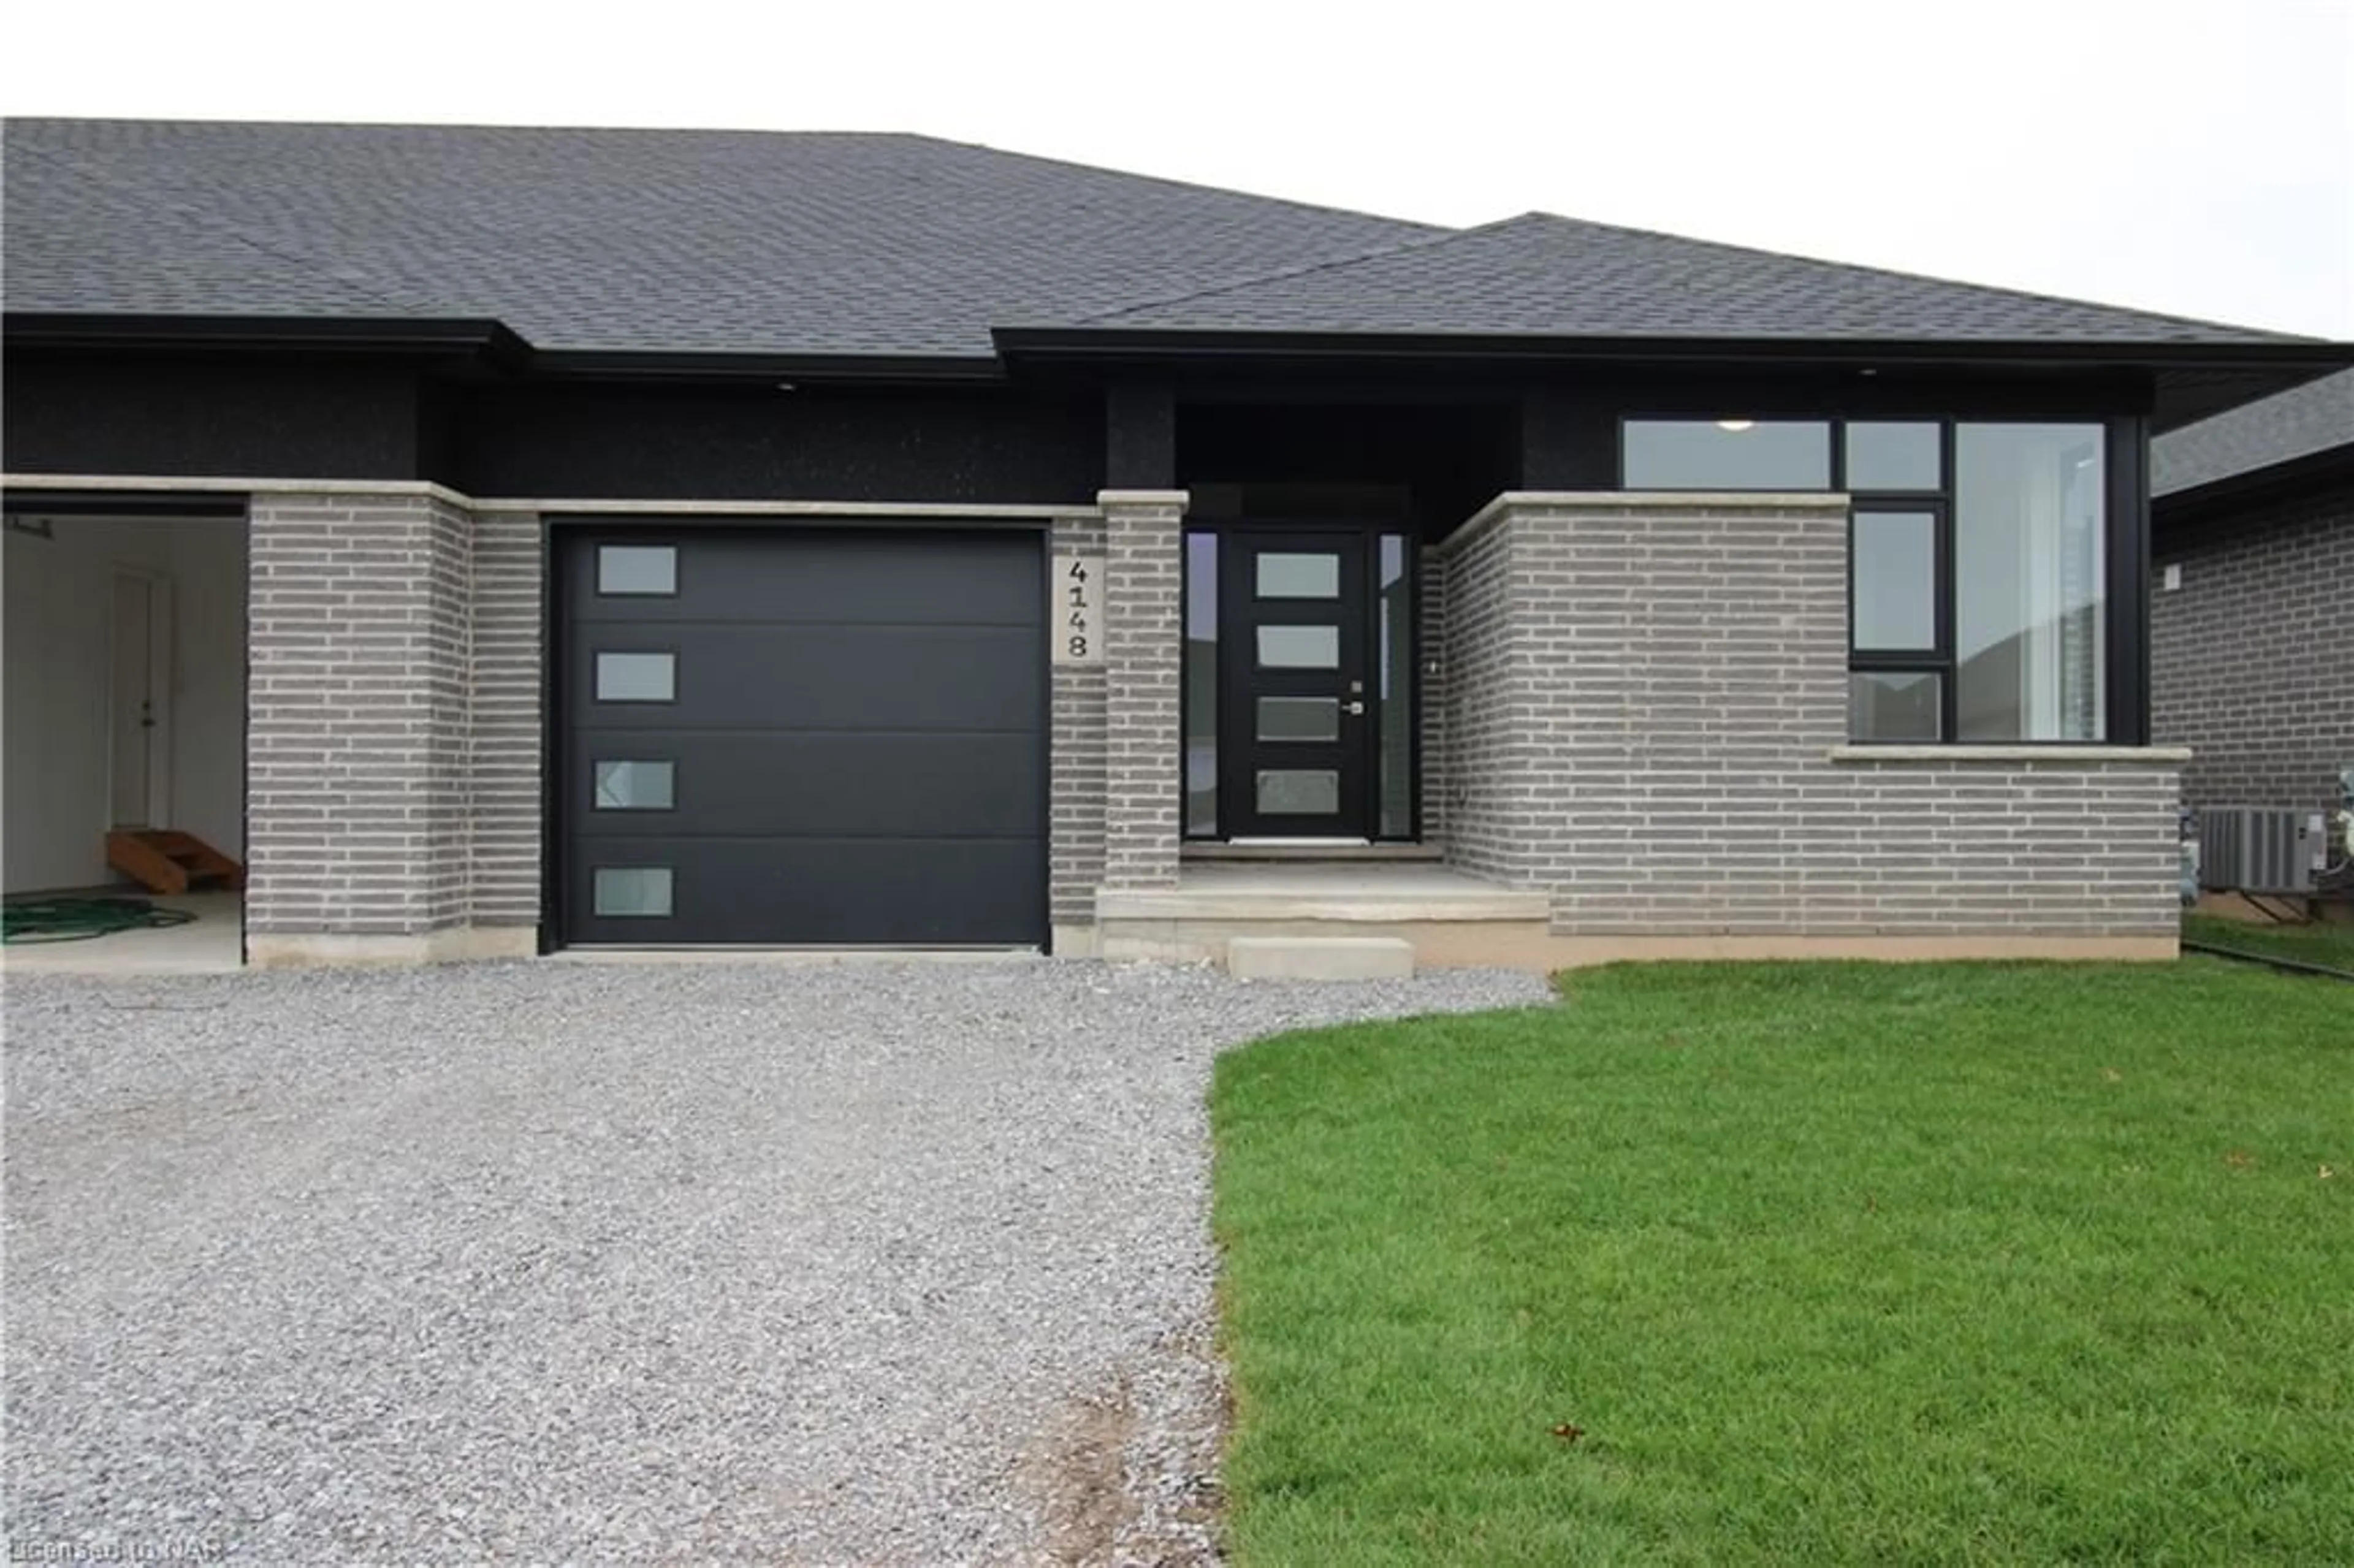 Home with brick exterior material for 4148 Village Creek Dr, Stevensville Ontario L0S 1S0